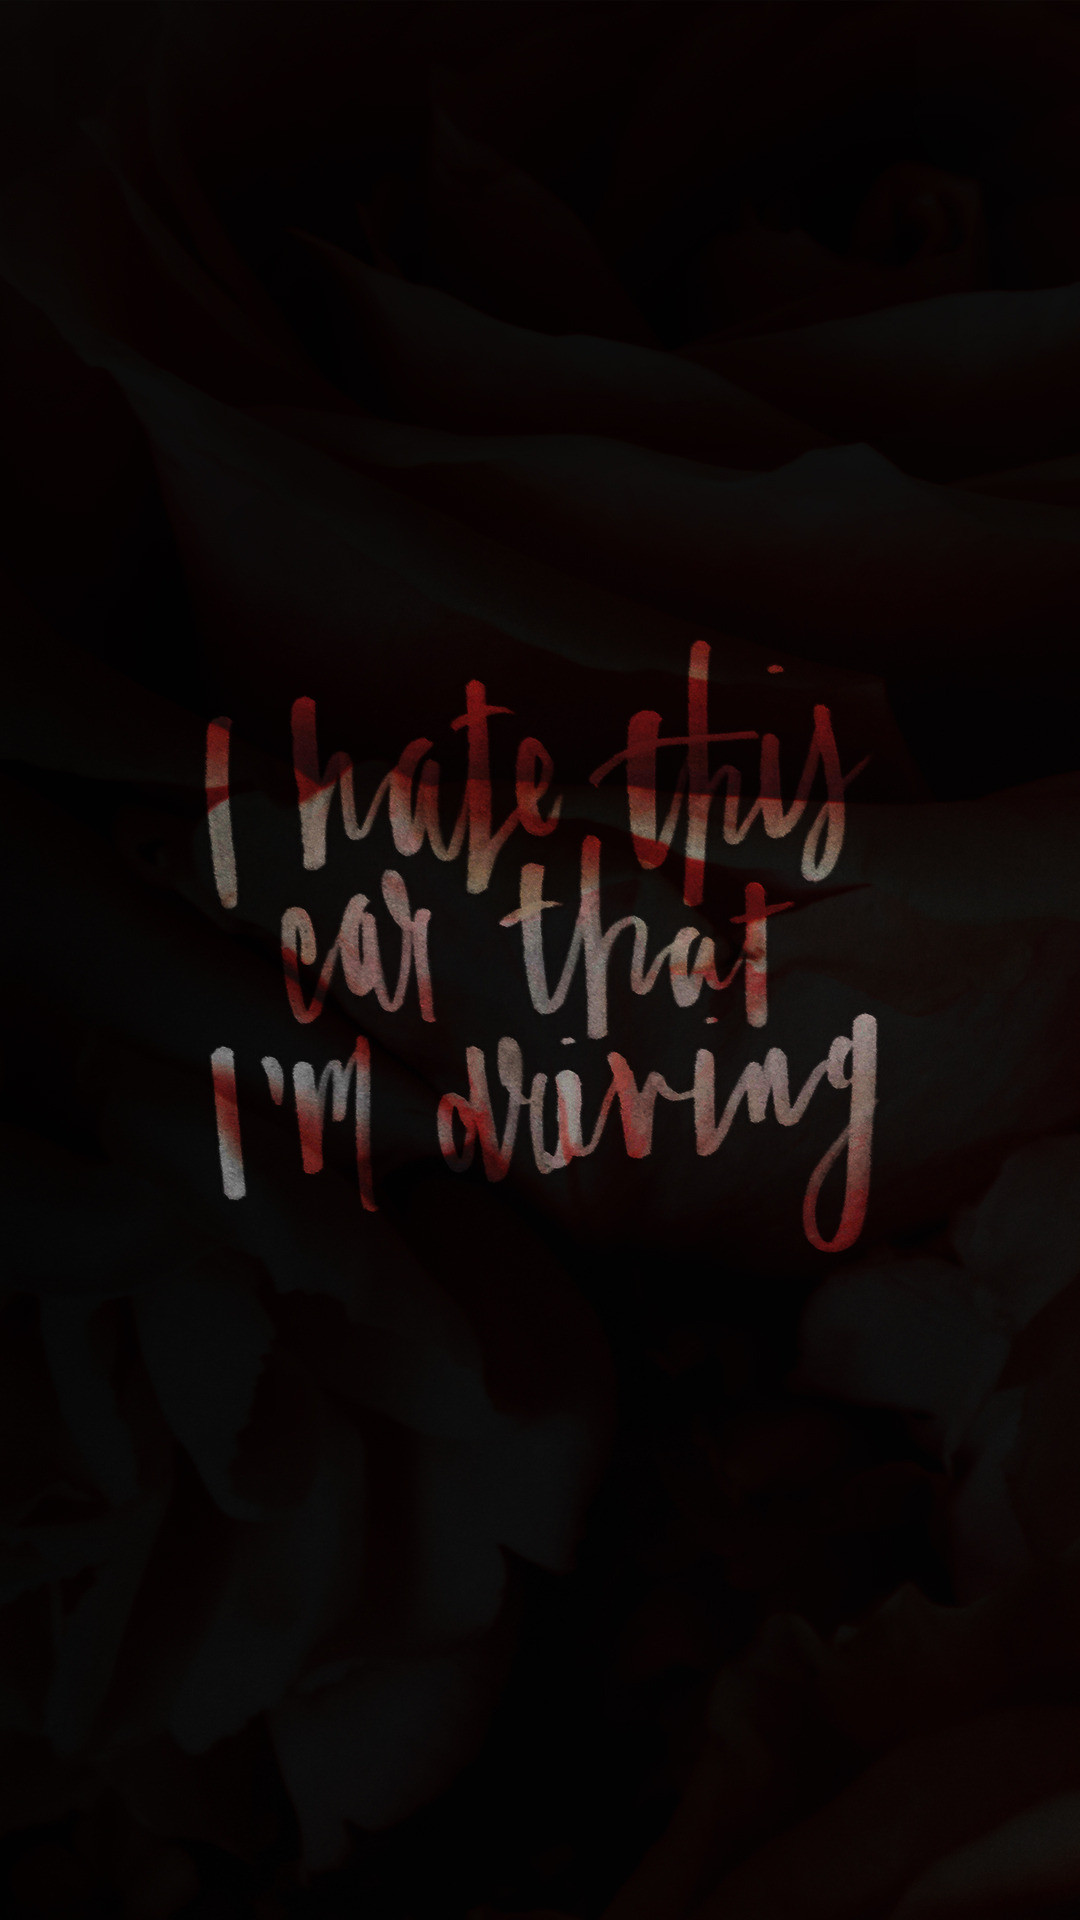 253 – twenty one pilots lyrics. sprinkle a little darkness on your soul. working up my muse to start a photobook project. If youre interested or curious